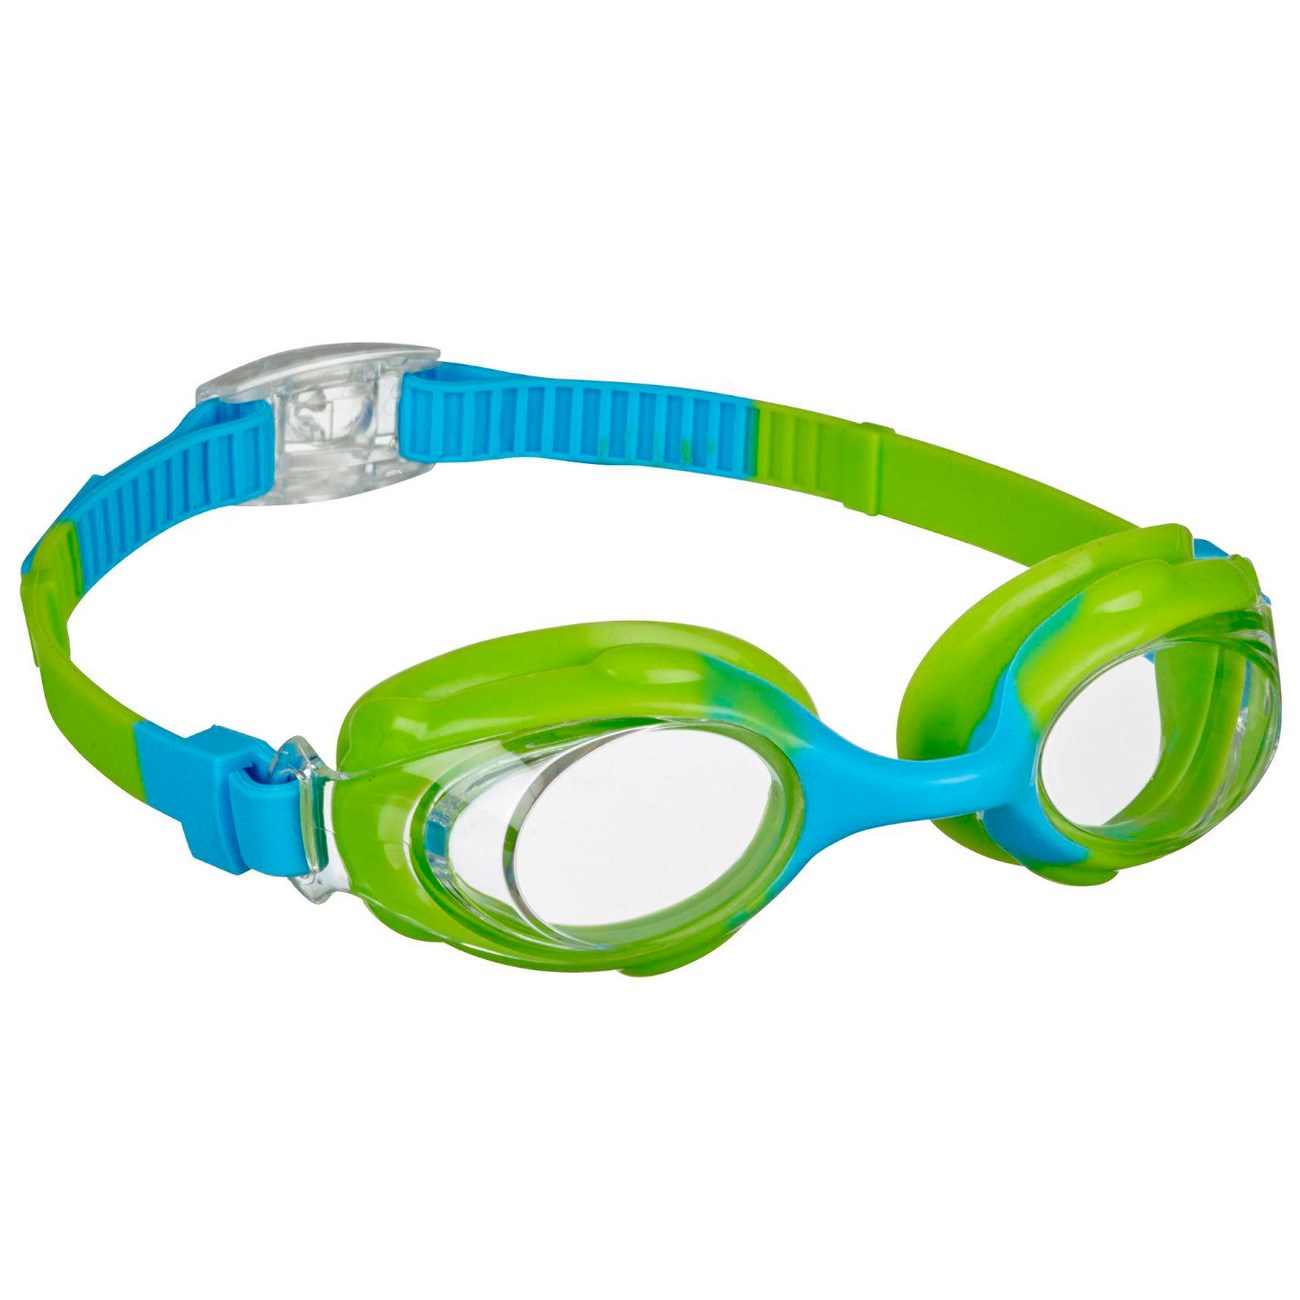 BECO Blue/Green Goggles BECO-SEALIFE VINCE 4+